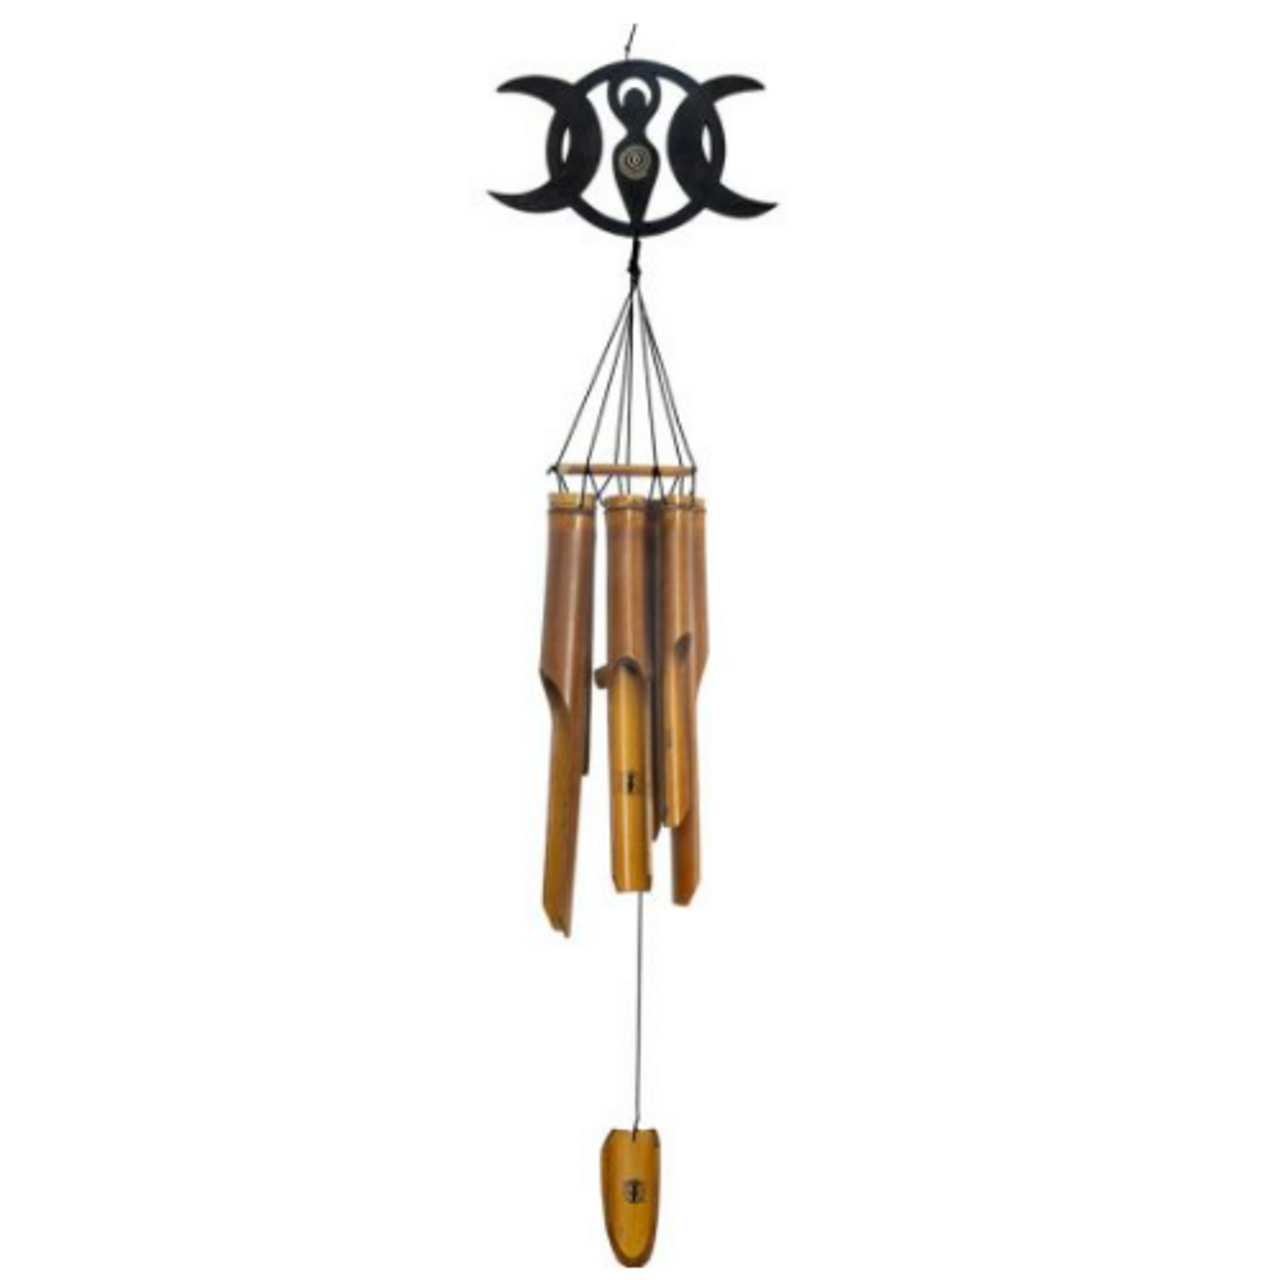 Windchime Bamboo 22" w/ Wiccan Designs - Select